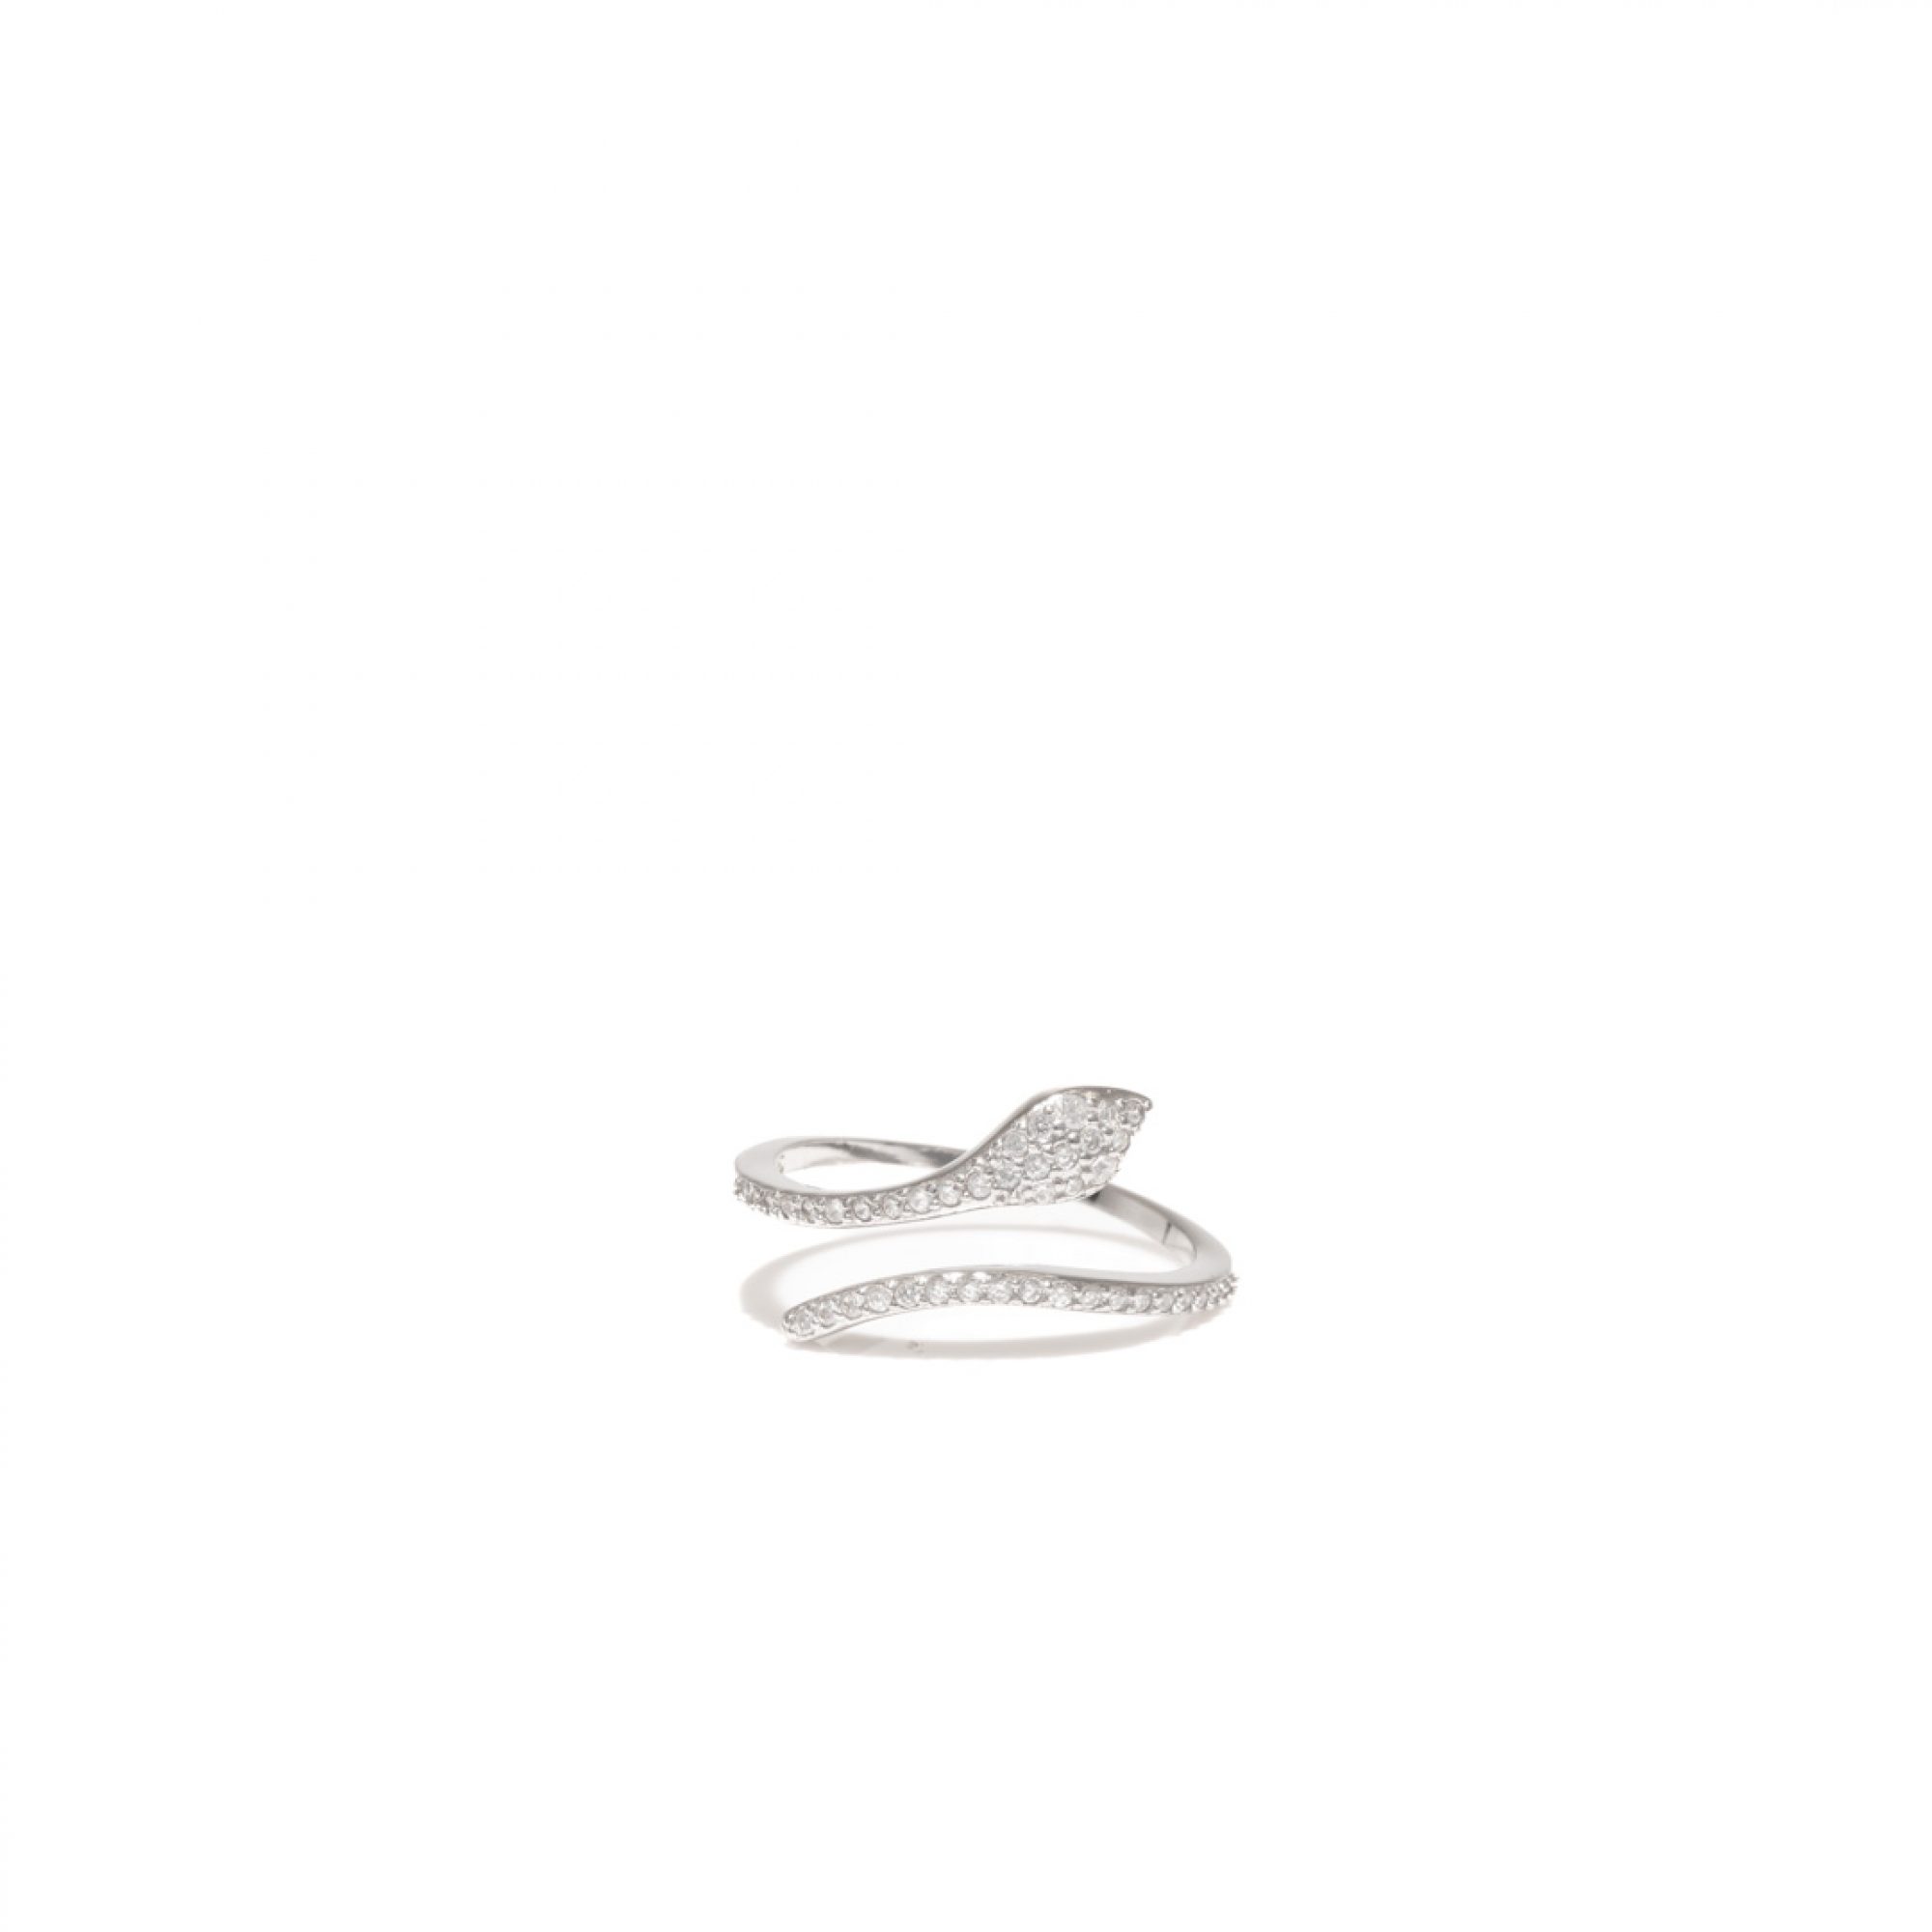 Silver snake ring with zircon stones